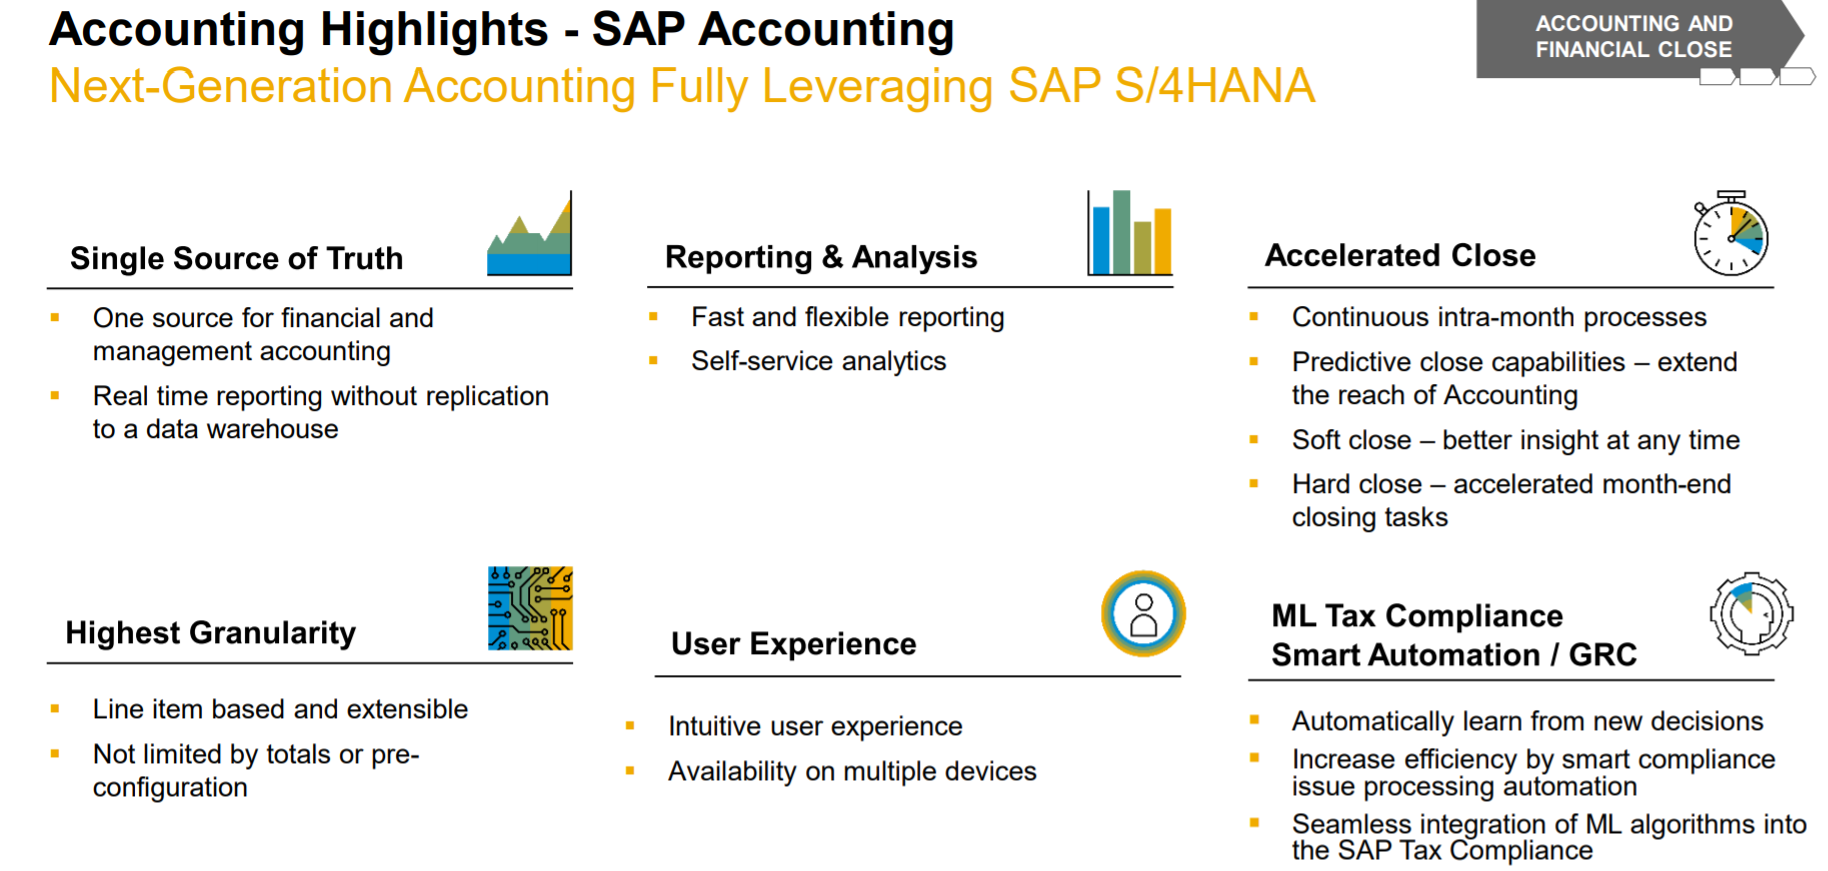 What is the business scope of SAP S/4HANA? 1